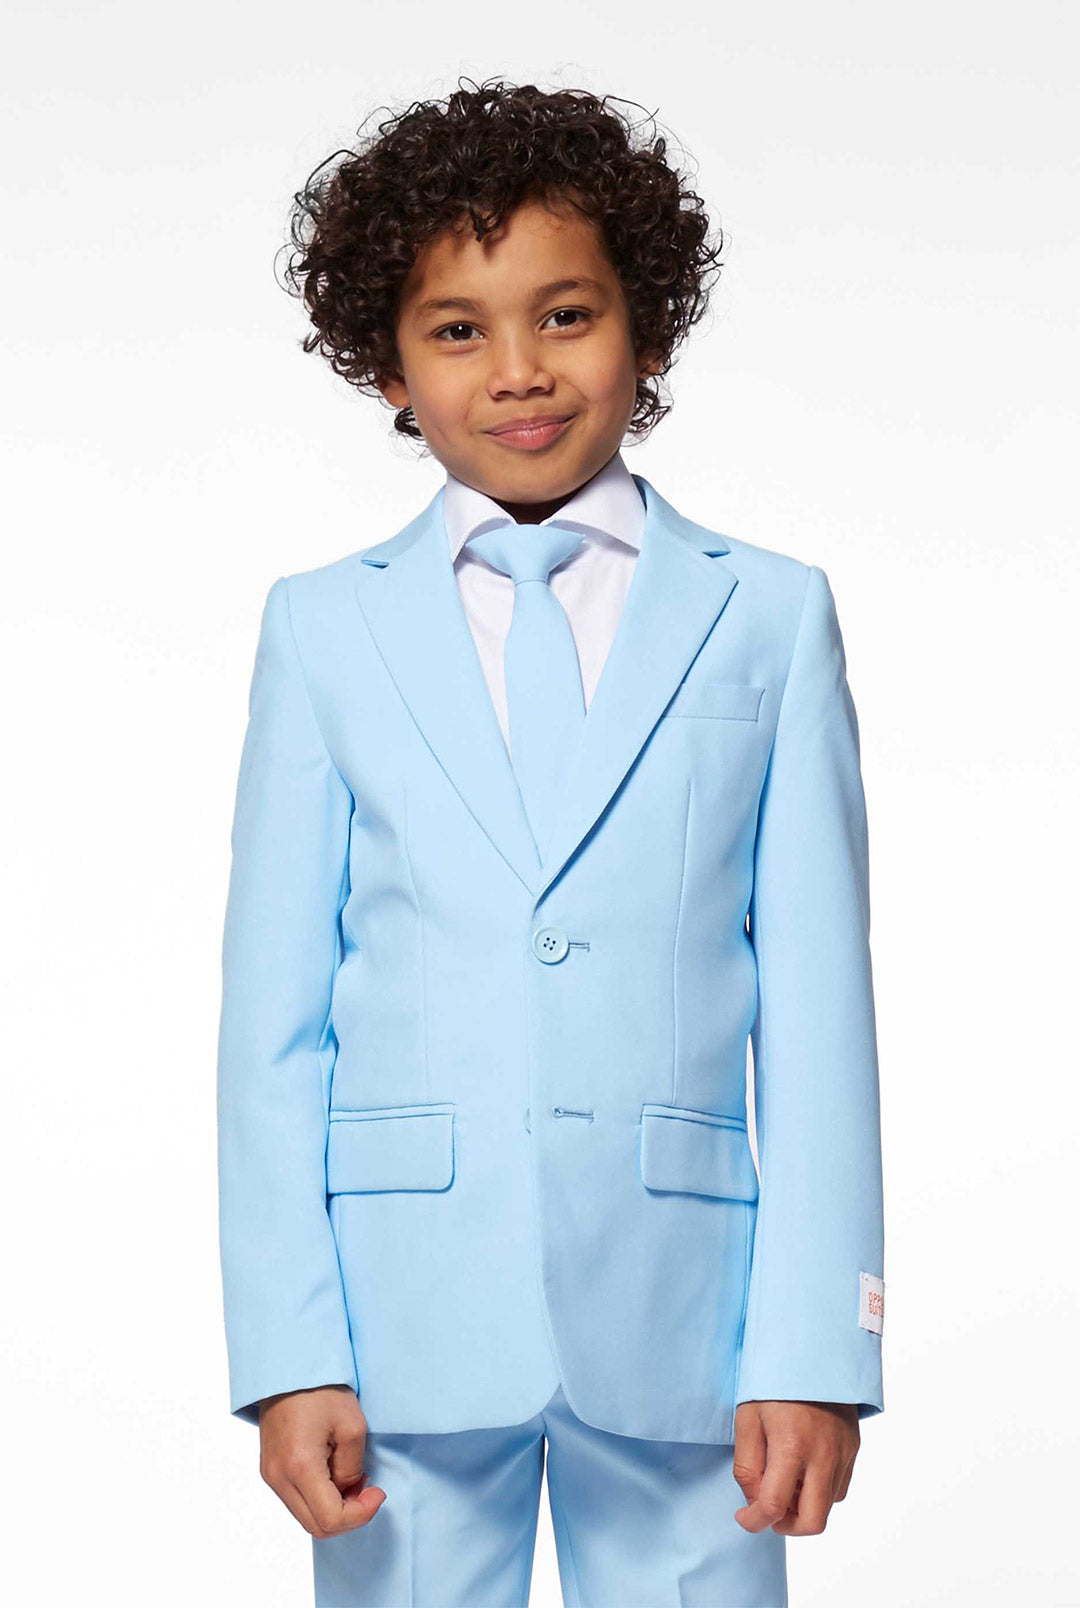 Boys Suits Blue 5 Piece Boys Wedding Suit Page Boy Party Prom 2 to 15 Years  | eBay